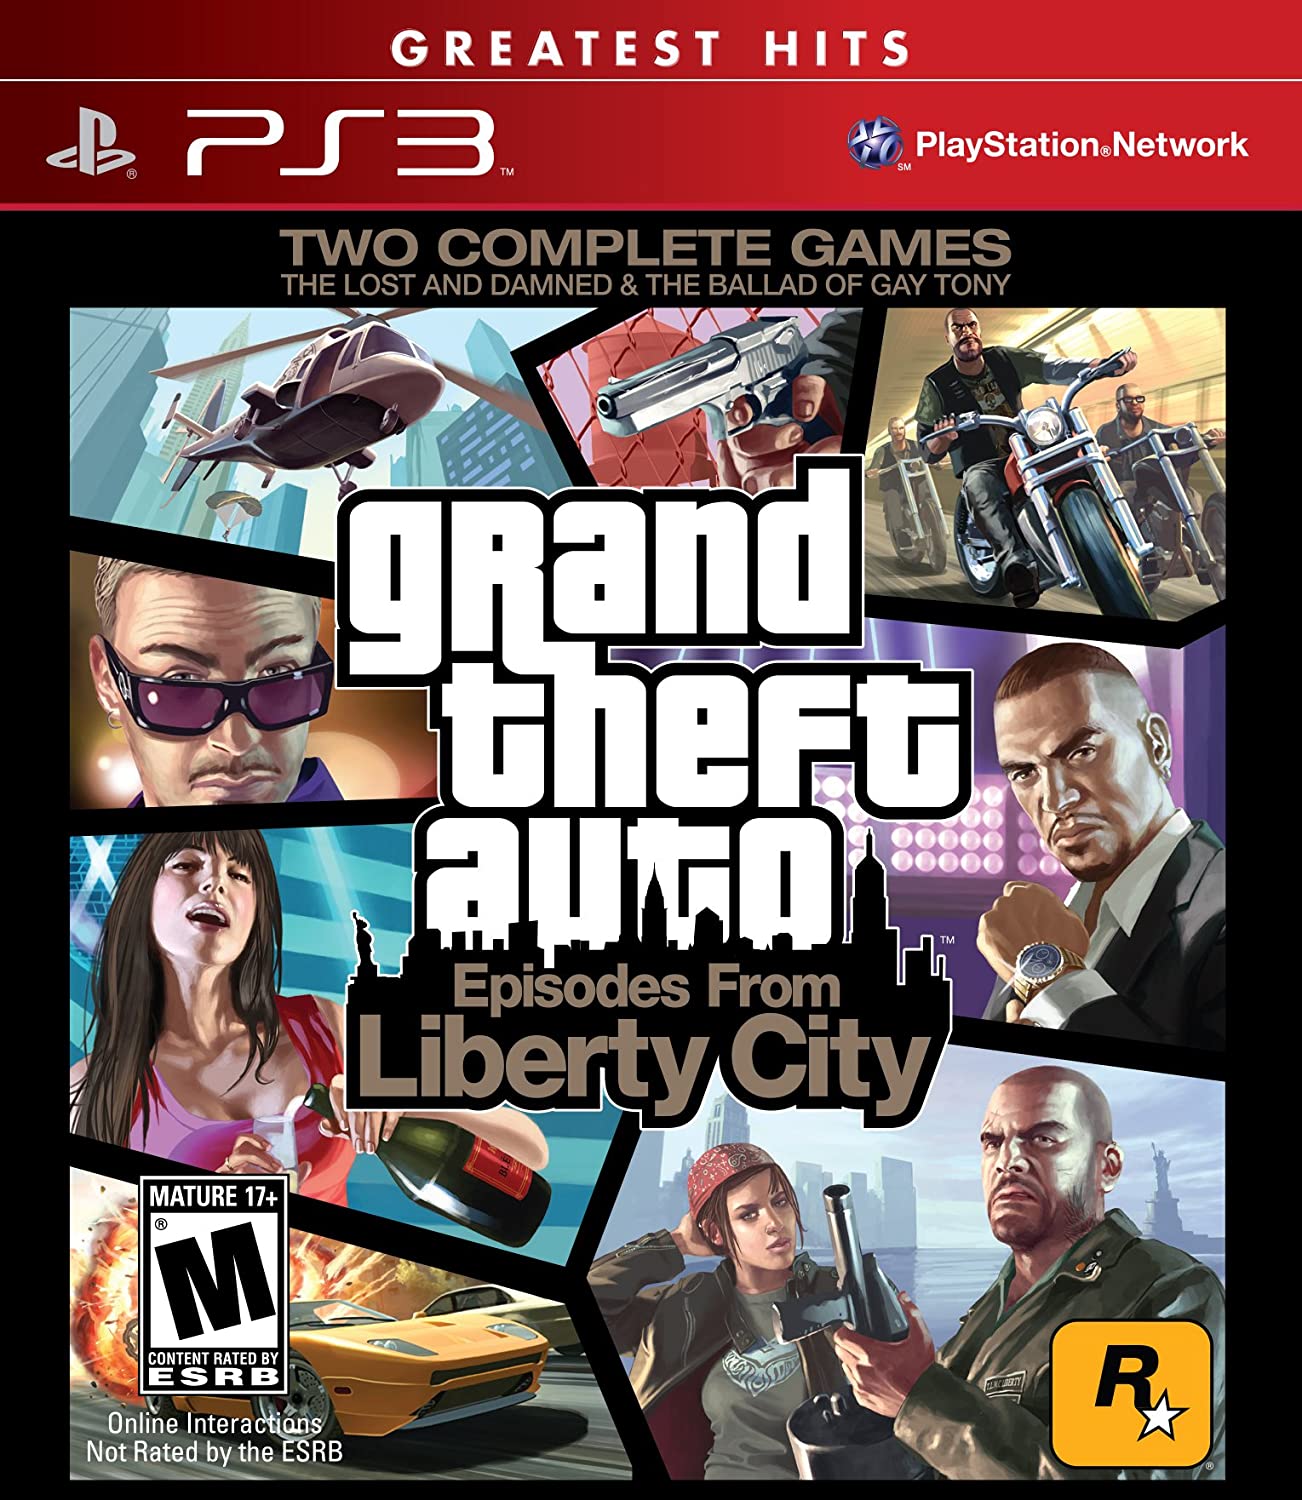 Grand Theft Auto Episodes From Liberty City PS3 (GTA)